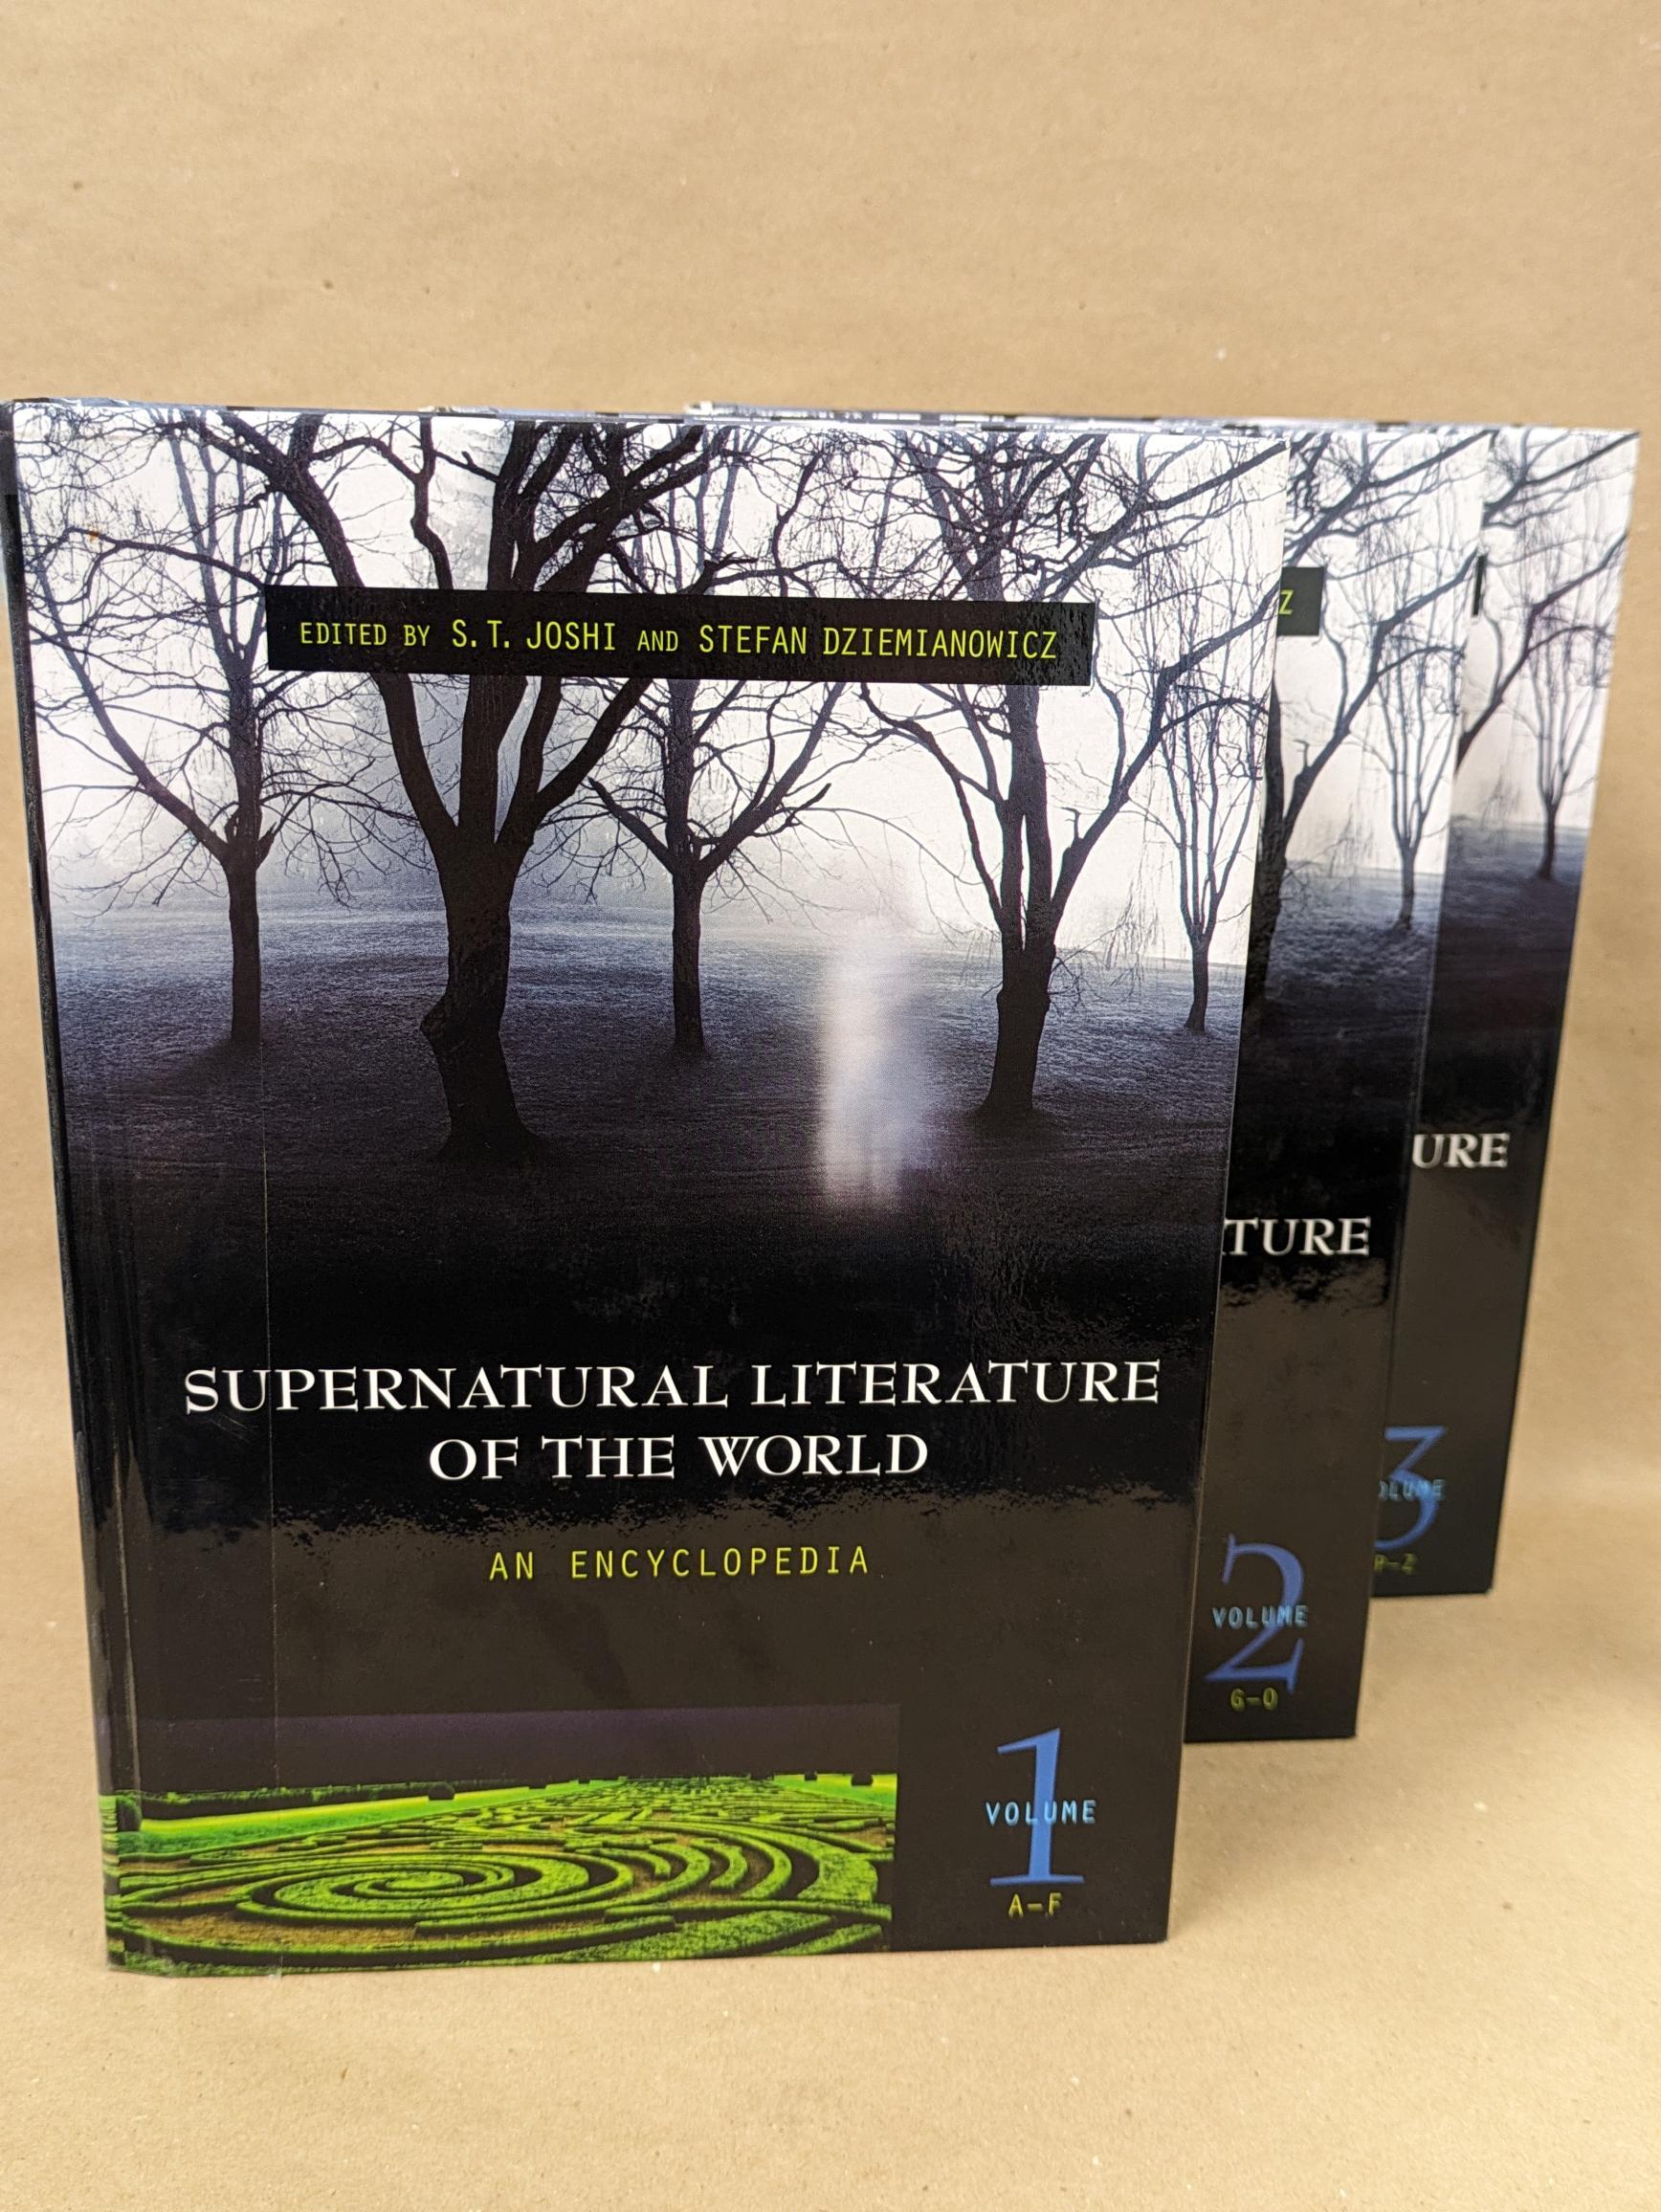 Supernatural Literature of the World: An Encyclopedia [3 volumes] - Joshi, S.T. and Dziemianowicz, Stefan (editors)